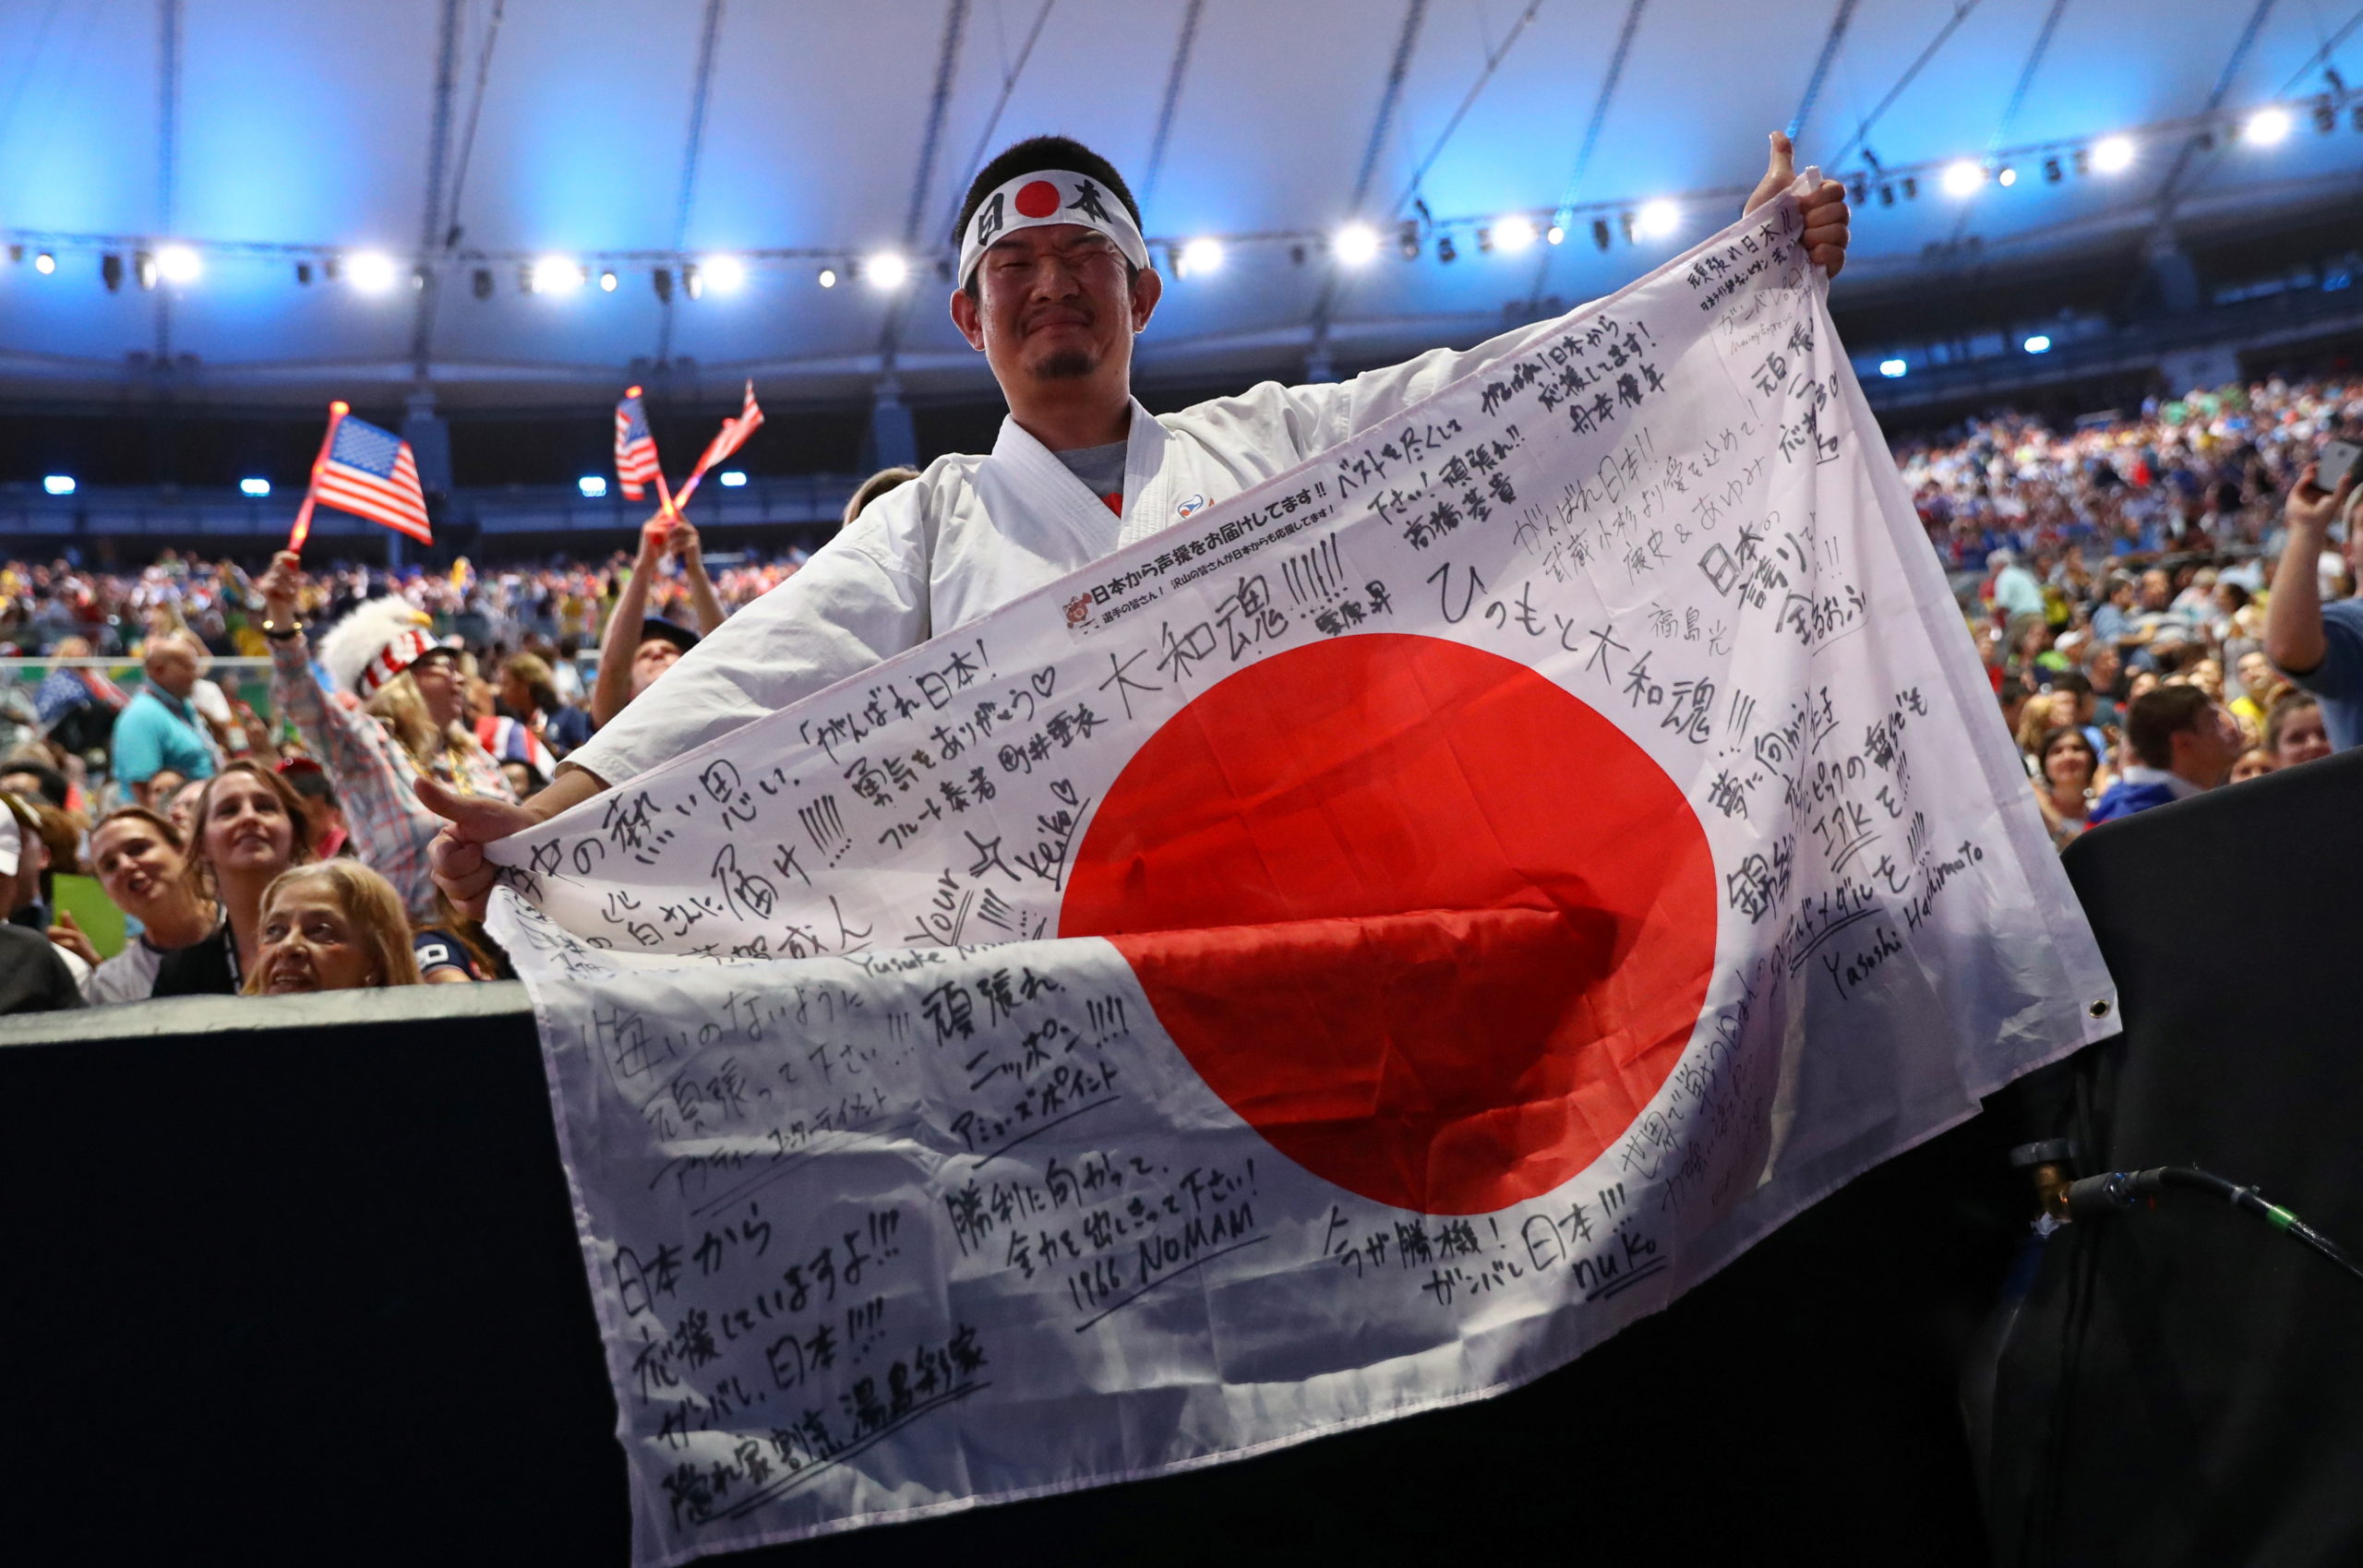 FILE PHOTO: Kazunori Takishima is pictured before the opening ceremony of the Rio 2016 Olympic Games in Rio de Janeiro, Brazil, August 5, 2016